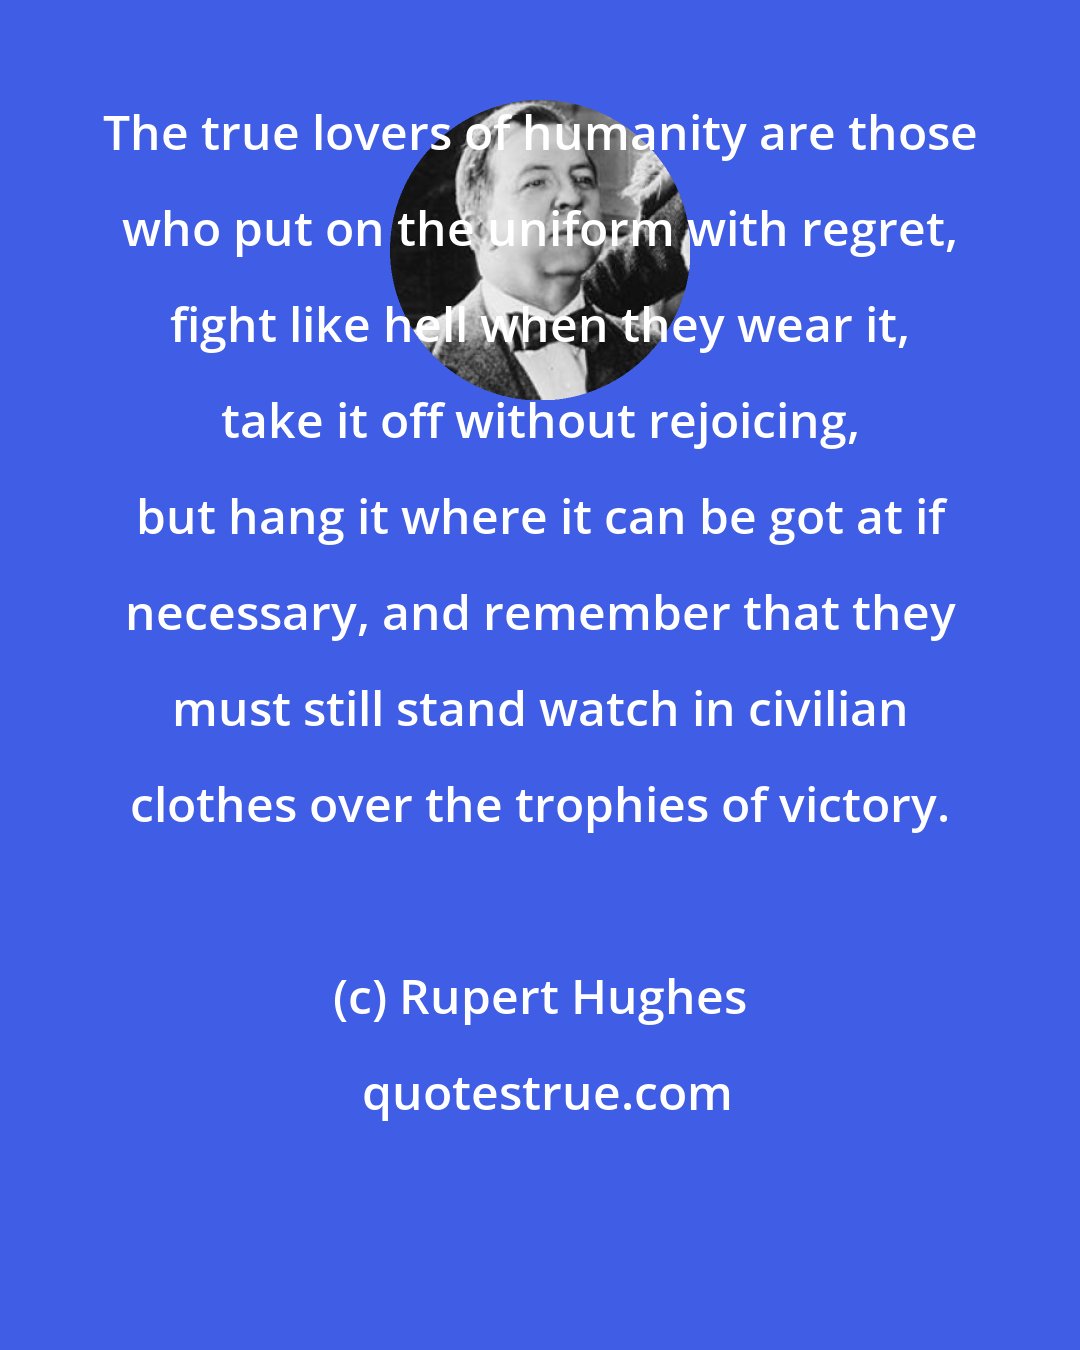 Rupert Hughes: The true lovers of humanity are those who put on the uniform with regret, fight like hell when they wear it, take it off without rejoicing, but hang it where it can be got at if necessary, and remember that they must still stand watch in civilian clothes over the trophies of victory.